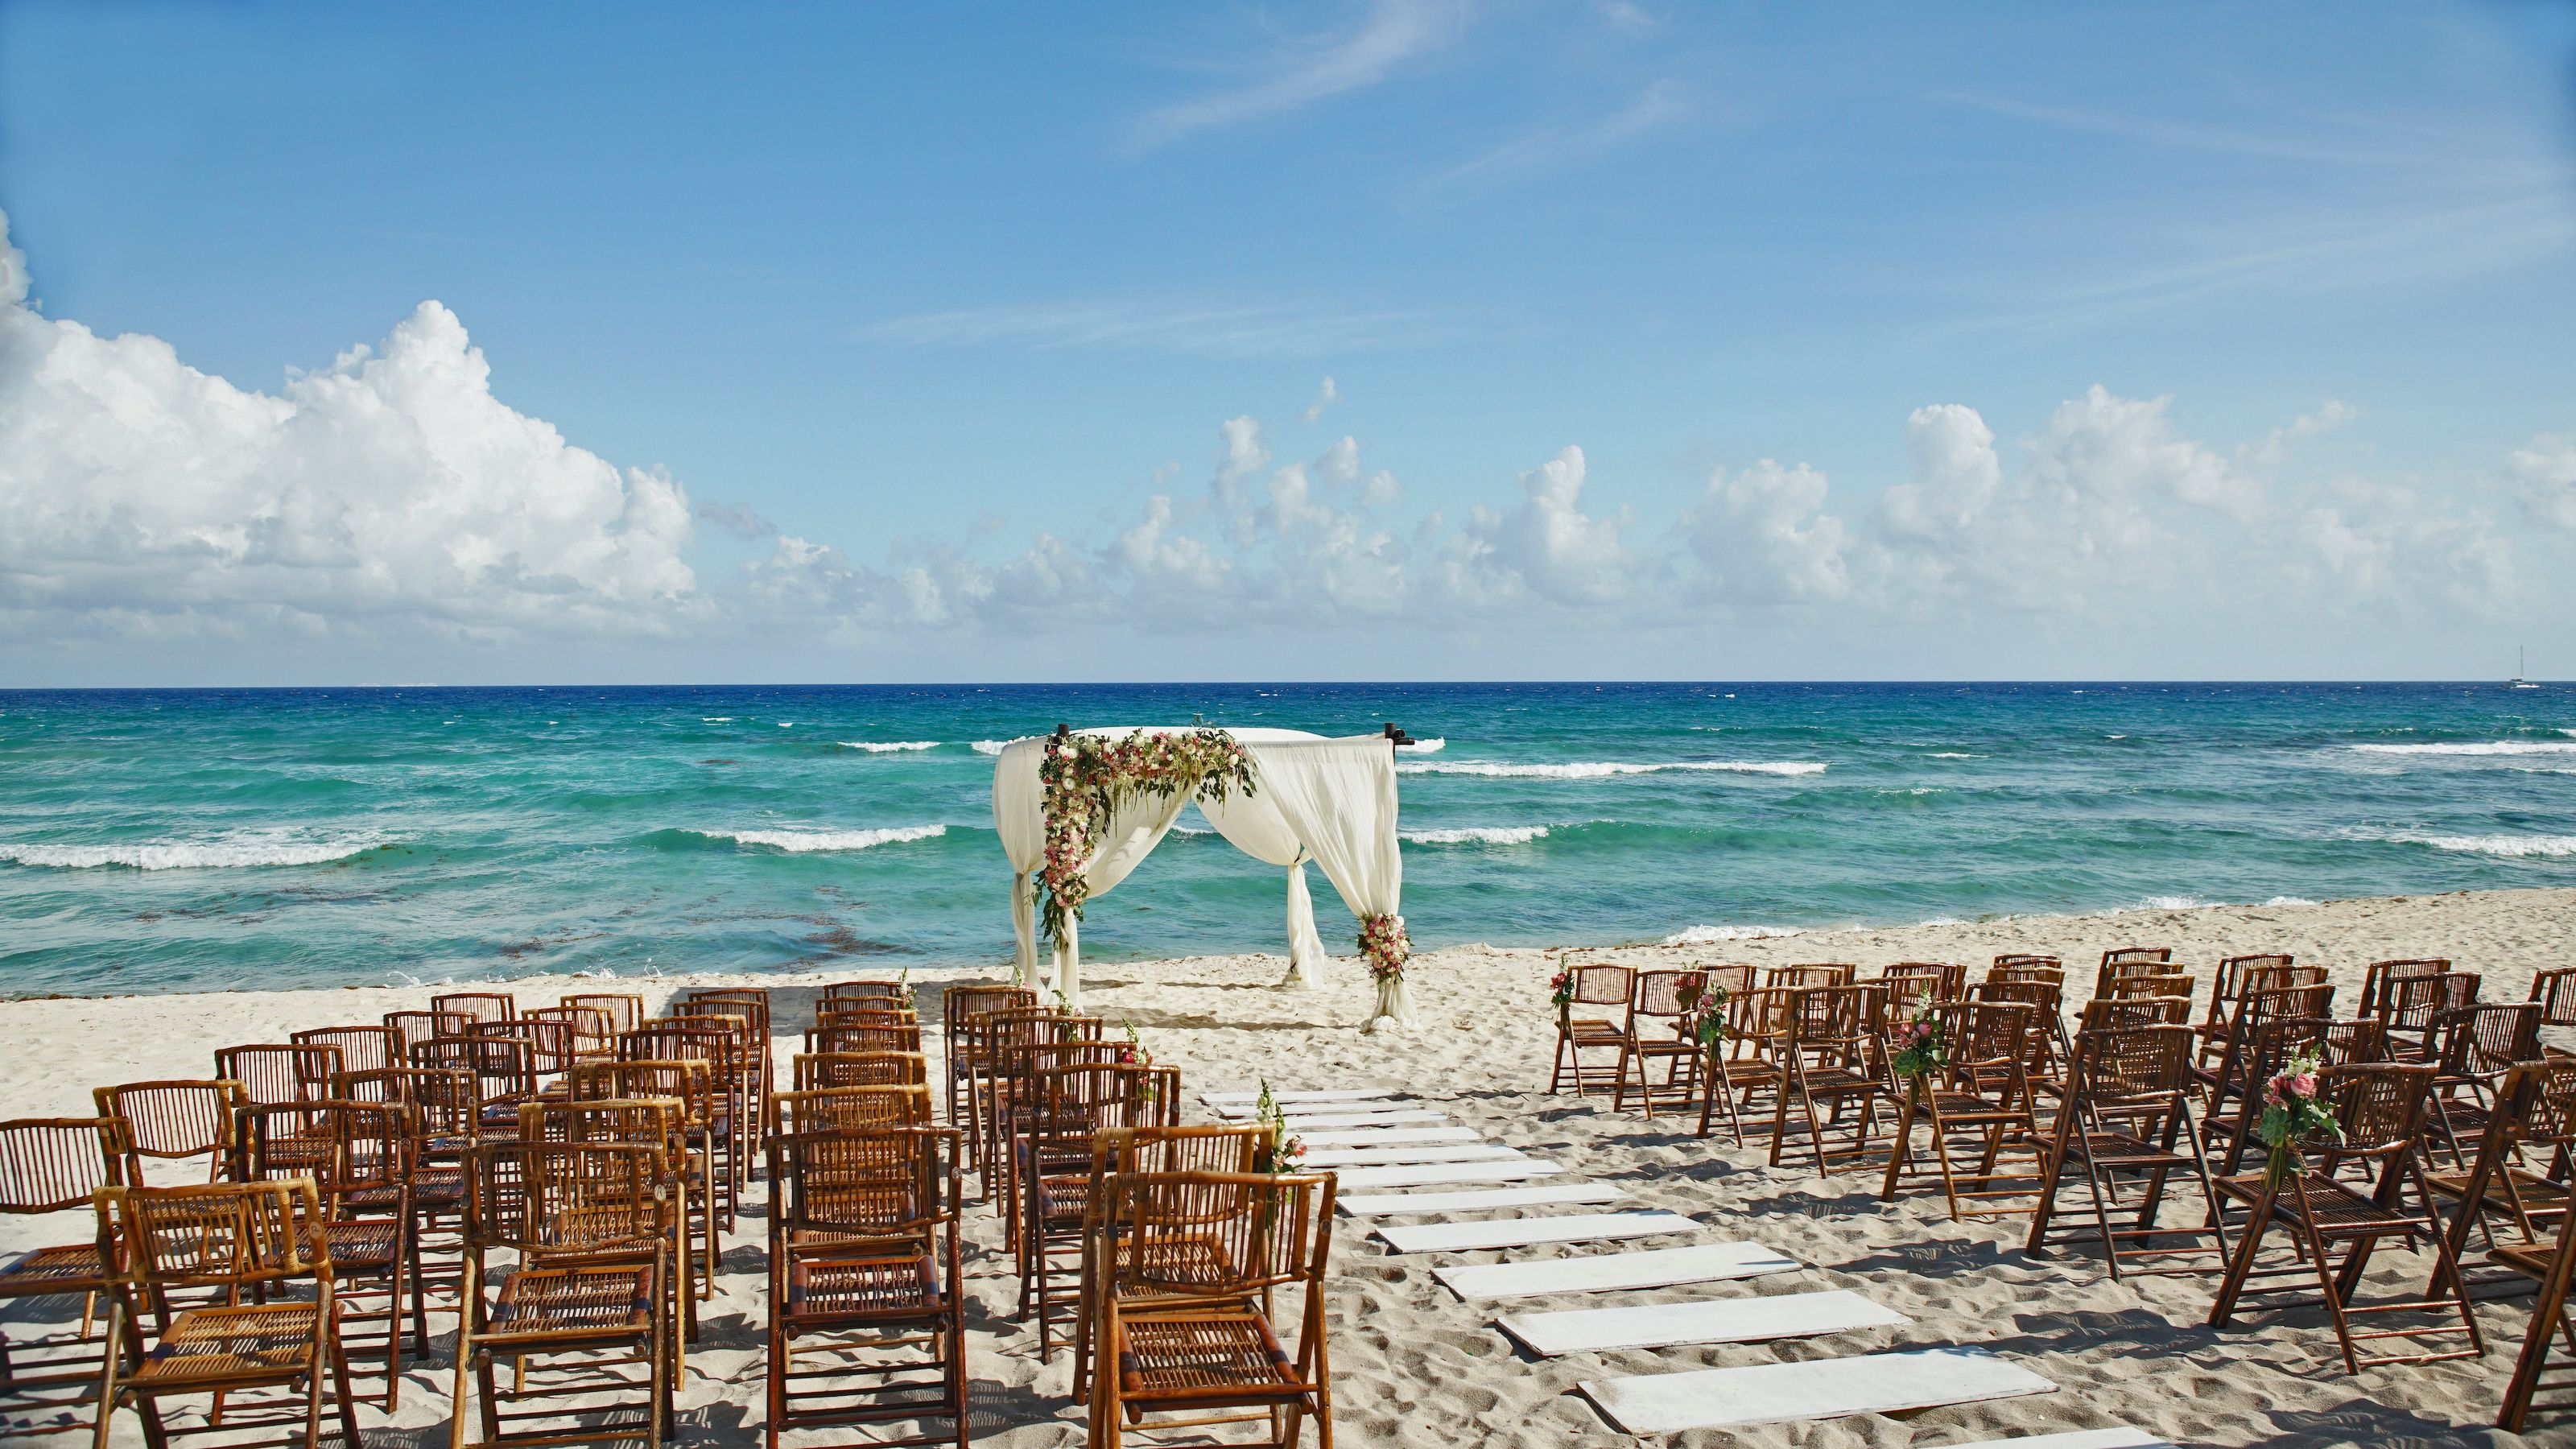 Your guide to booking wedding destination flights at the perfect